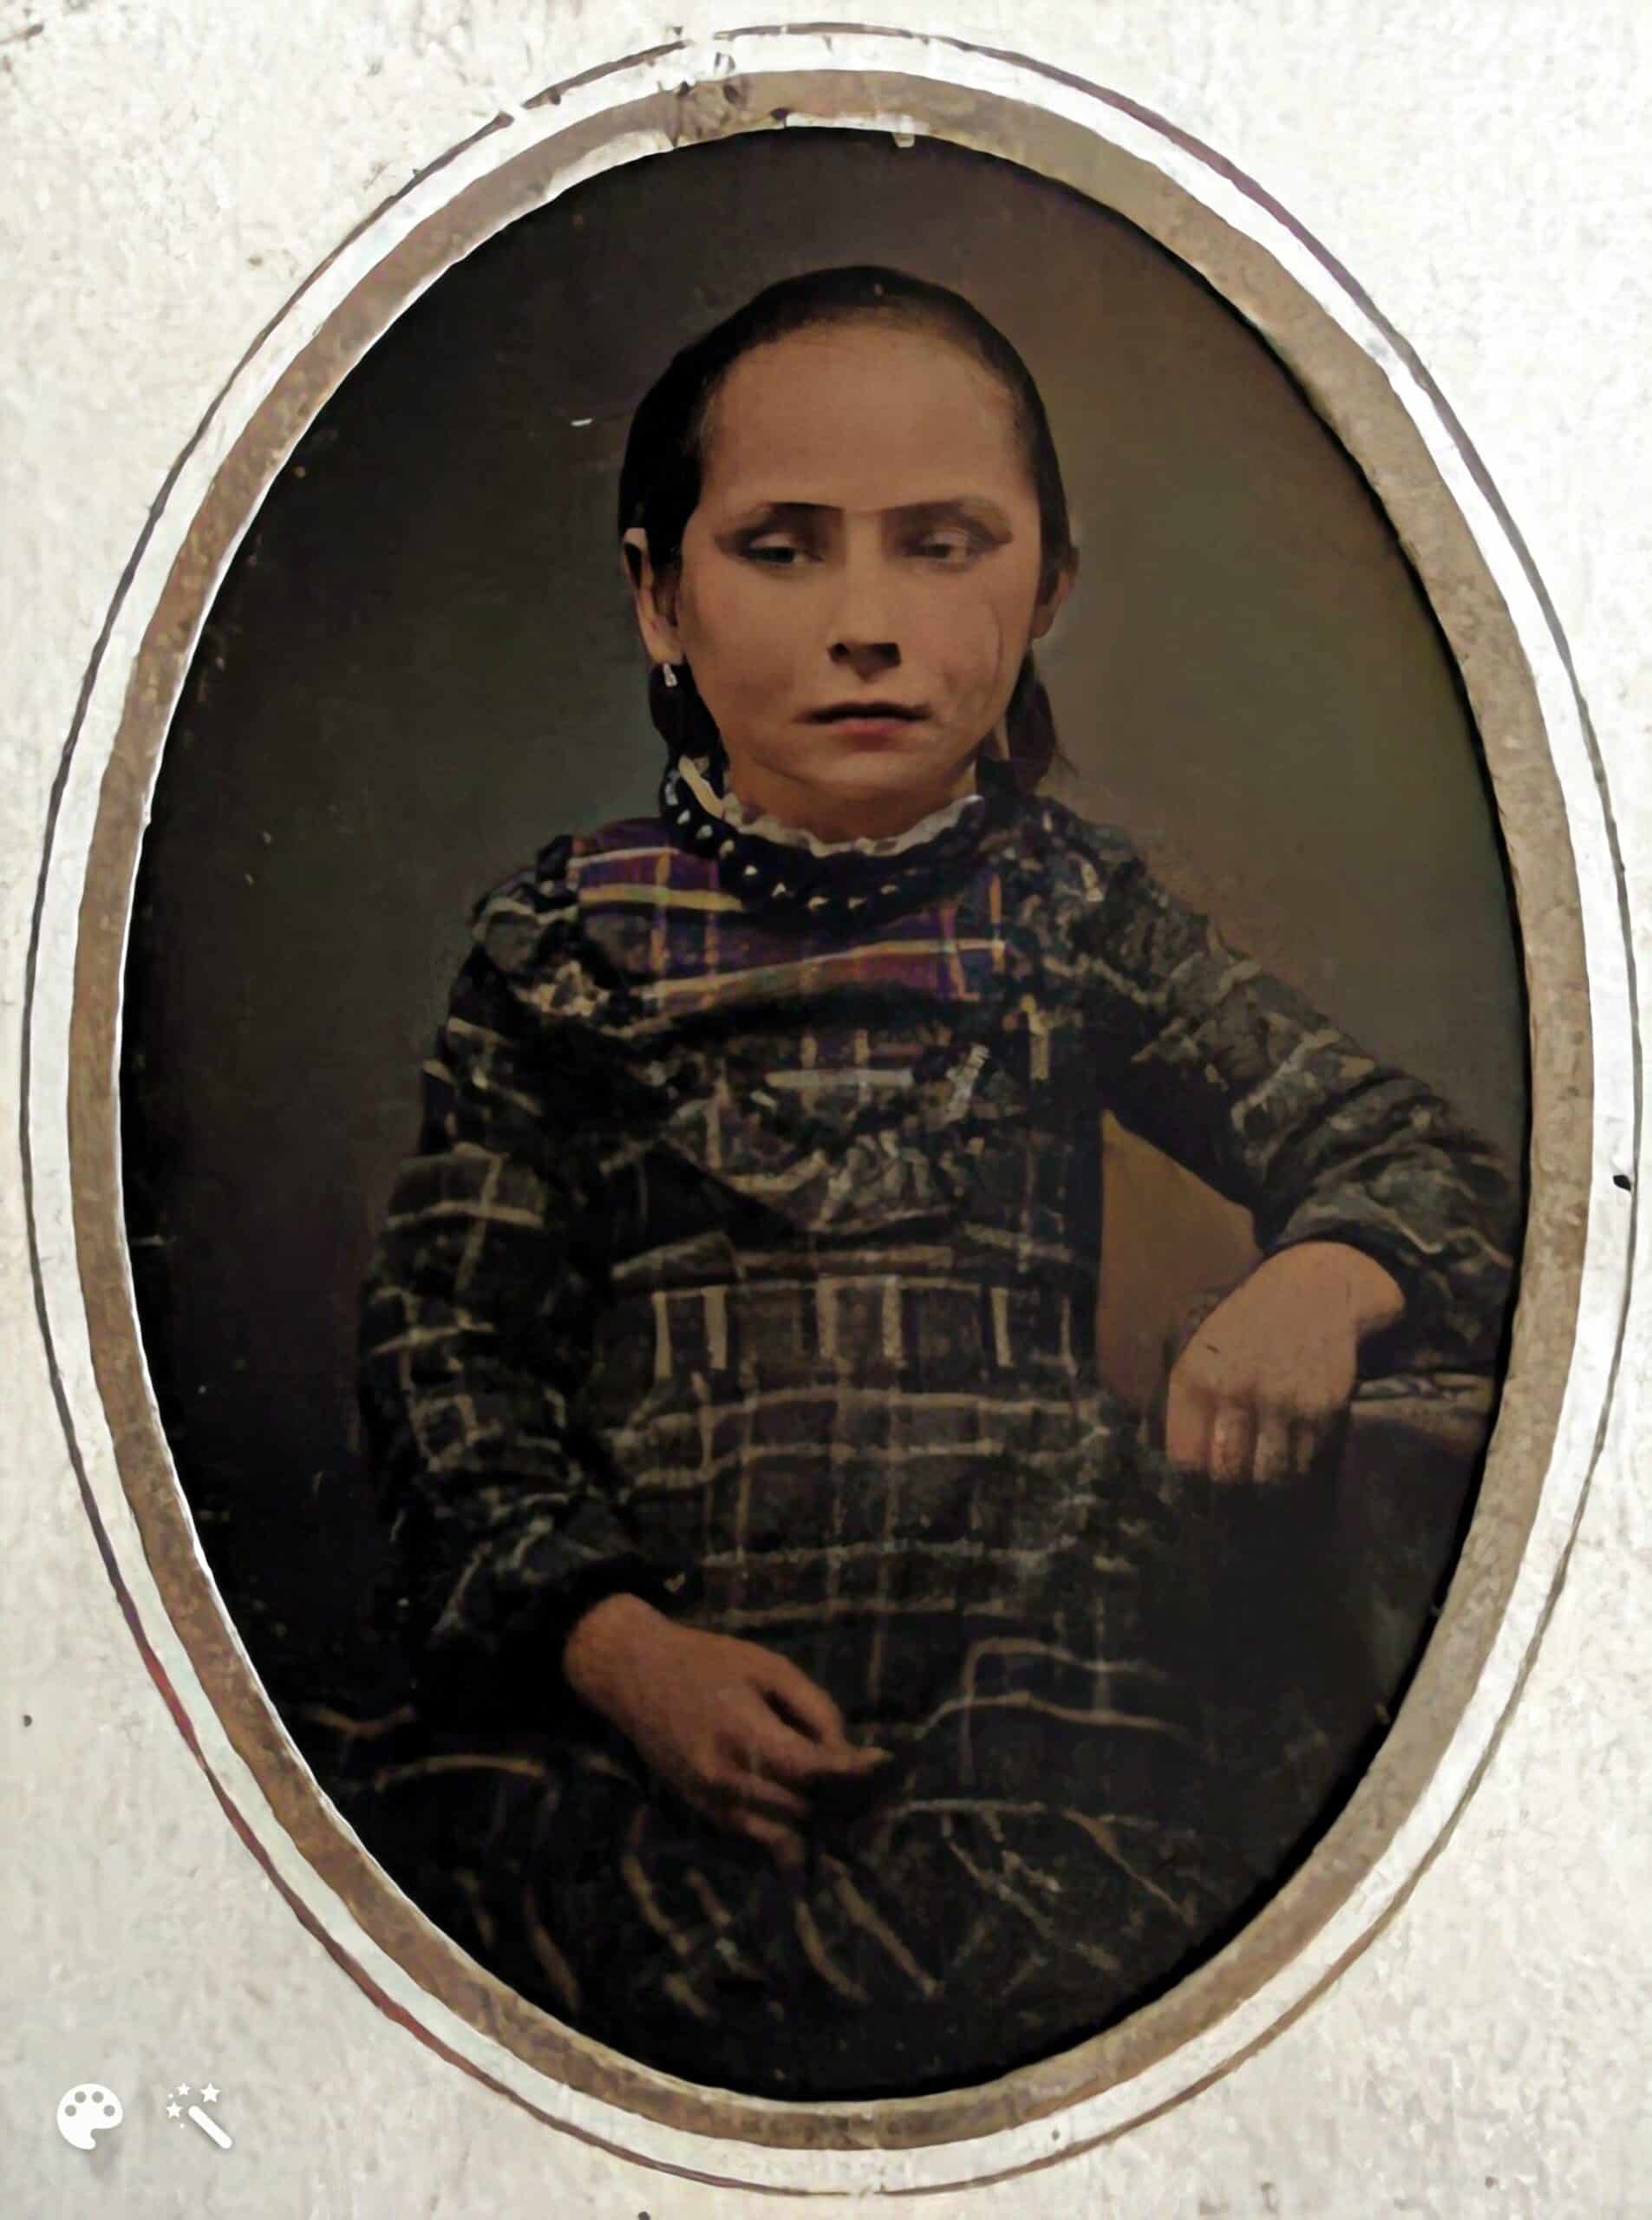 Mary J. Wick (born Bayer), Scott’s great-great-grandmother. Colorized and enhanced by MyHeritage